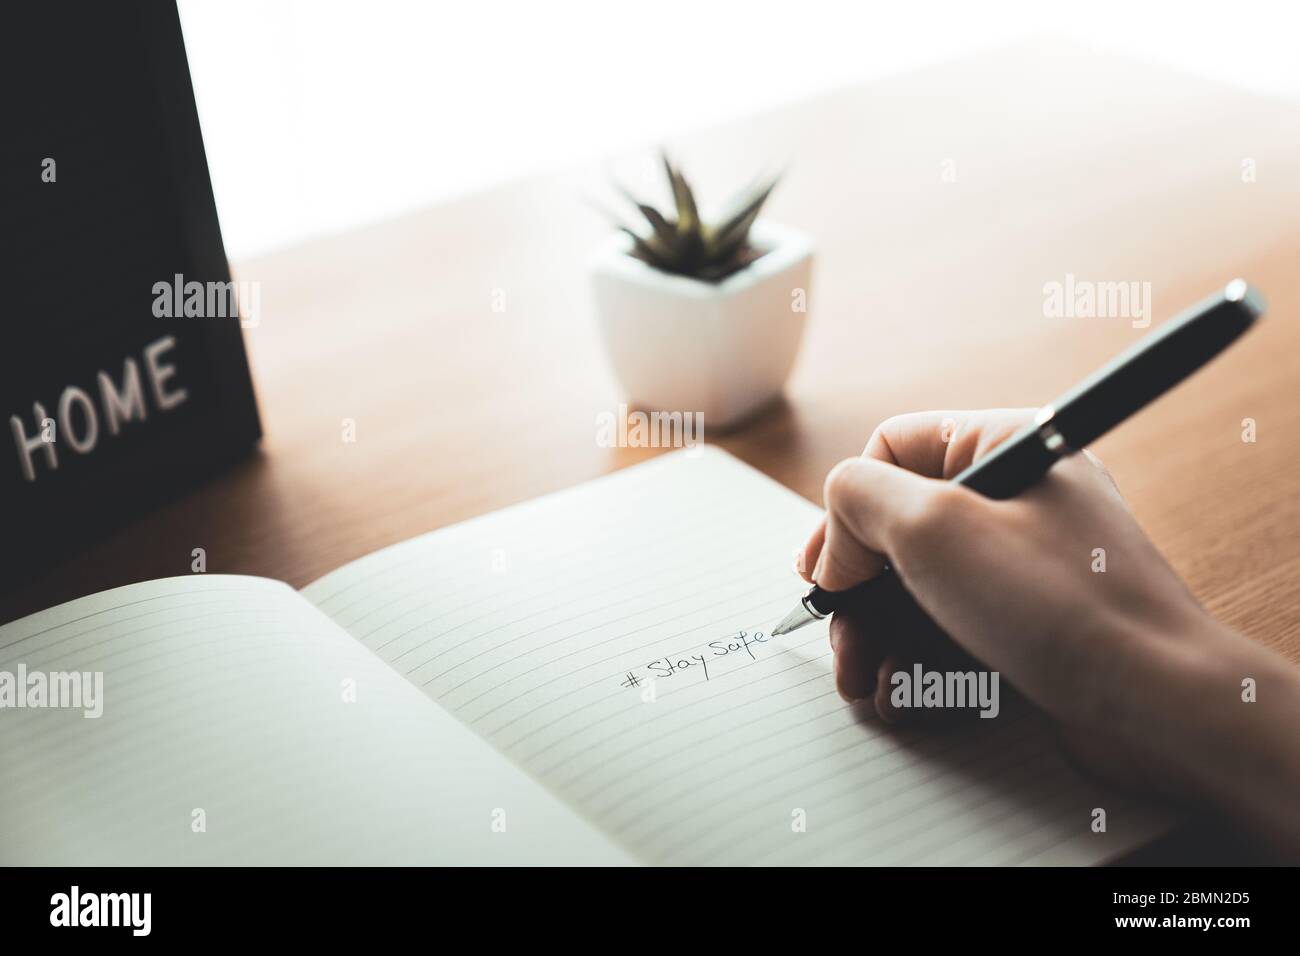 Woman hand with pencil writing stay safe on notebook at home desk. Work from home and quarantine concept on epidemic outbreak. Stock Photo